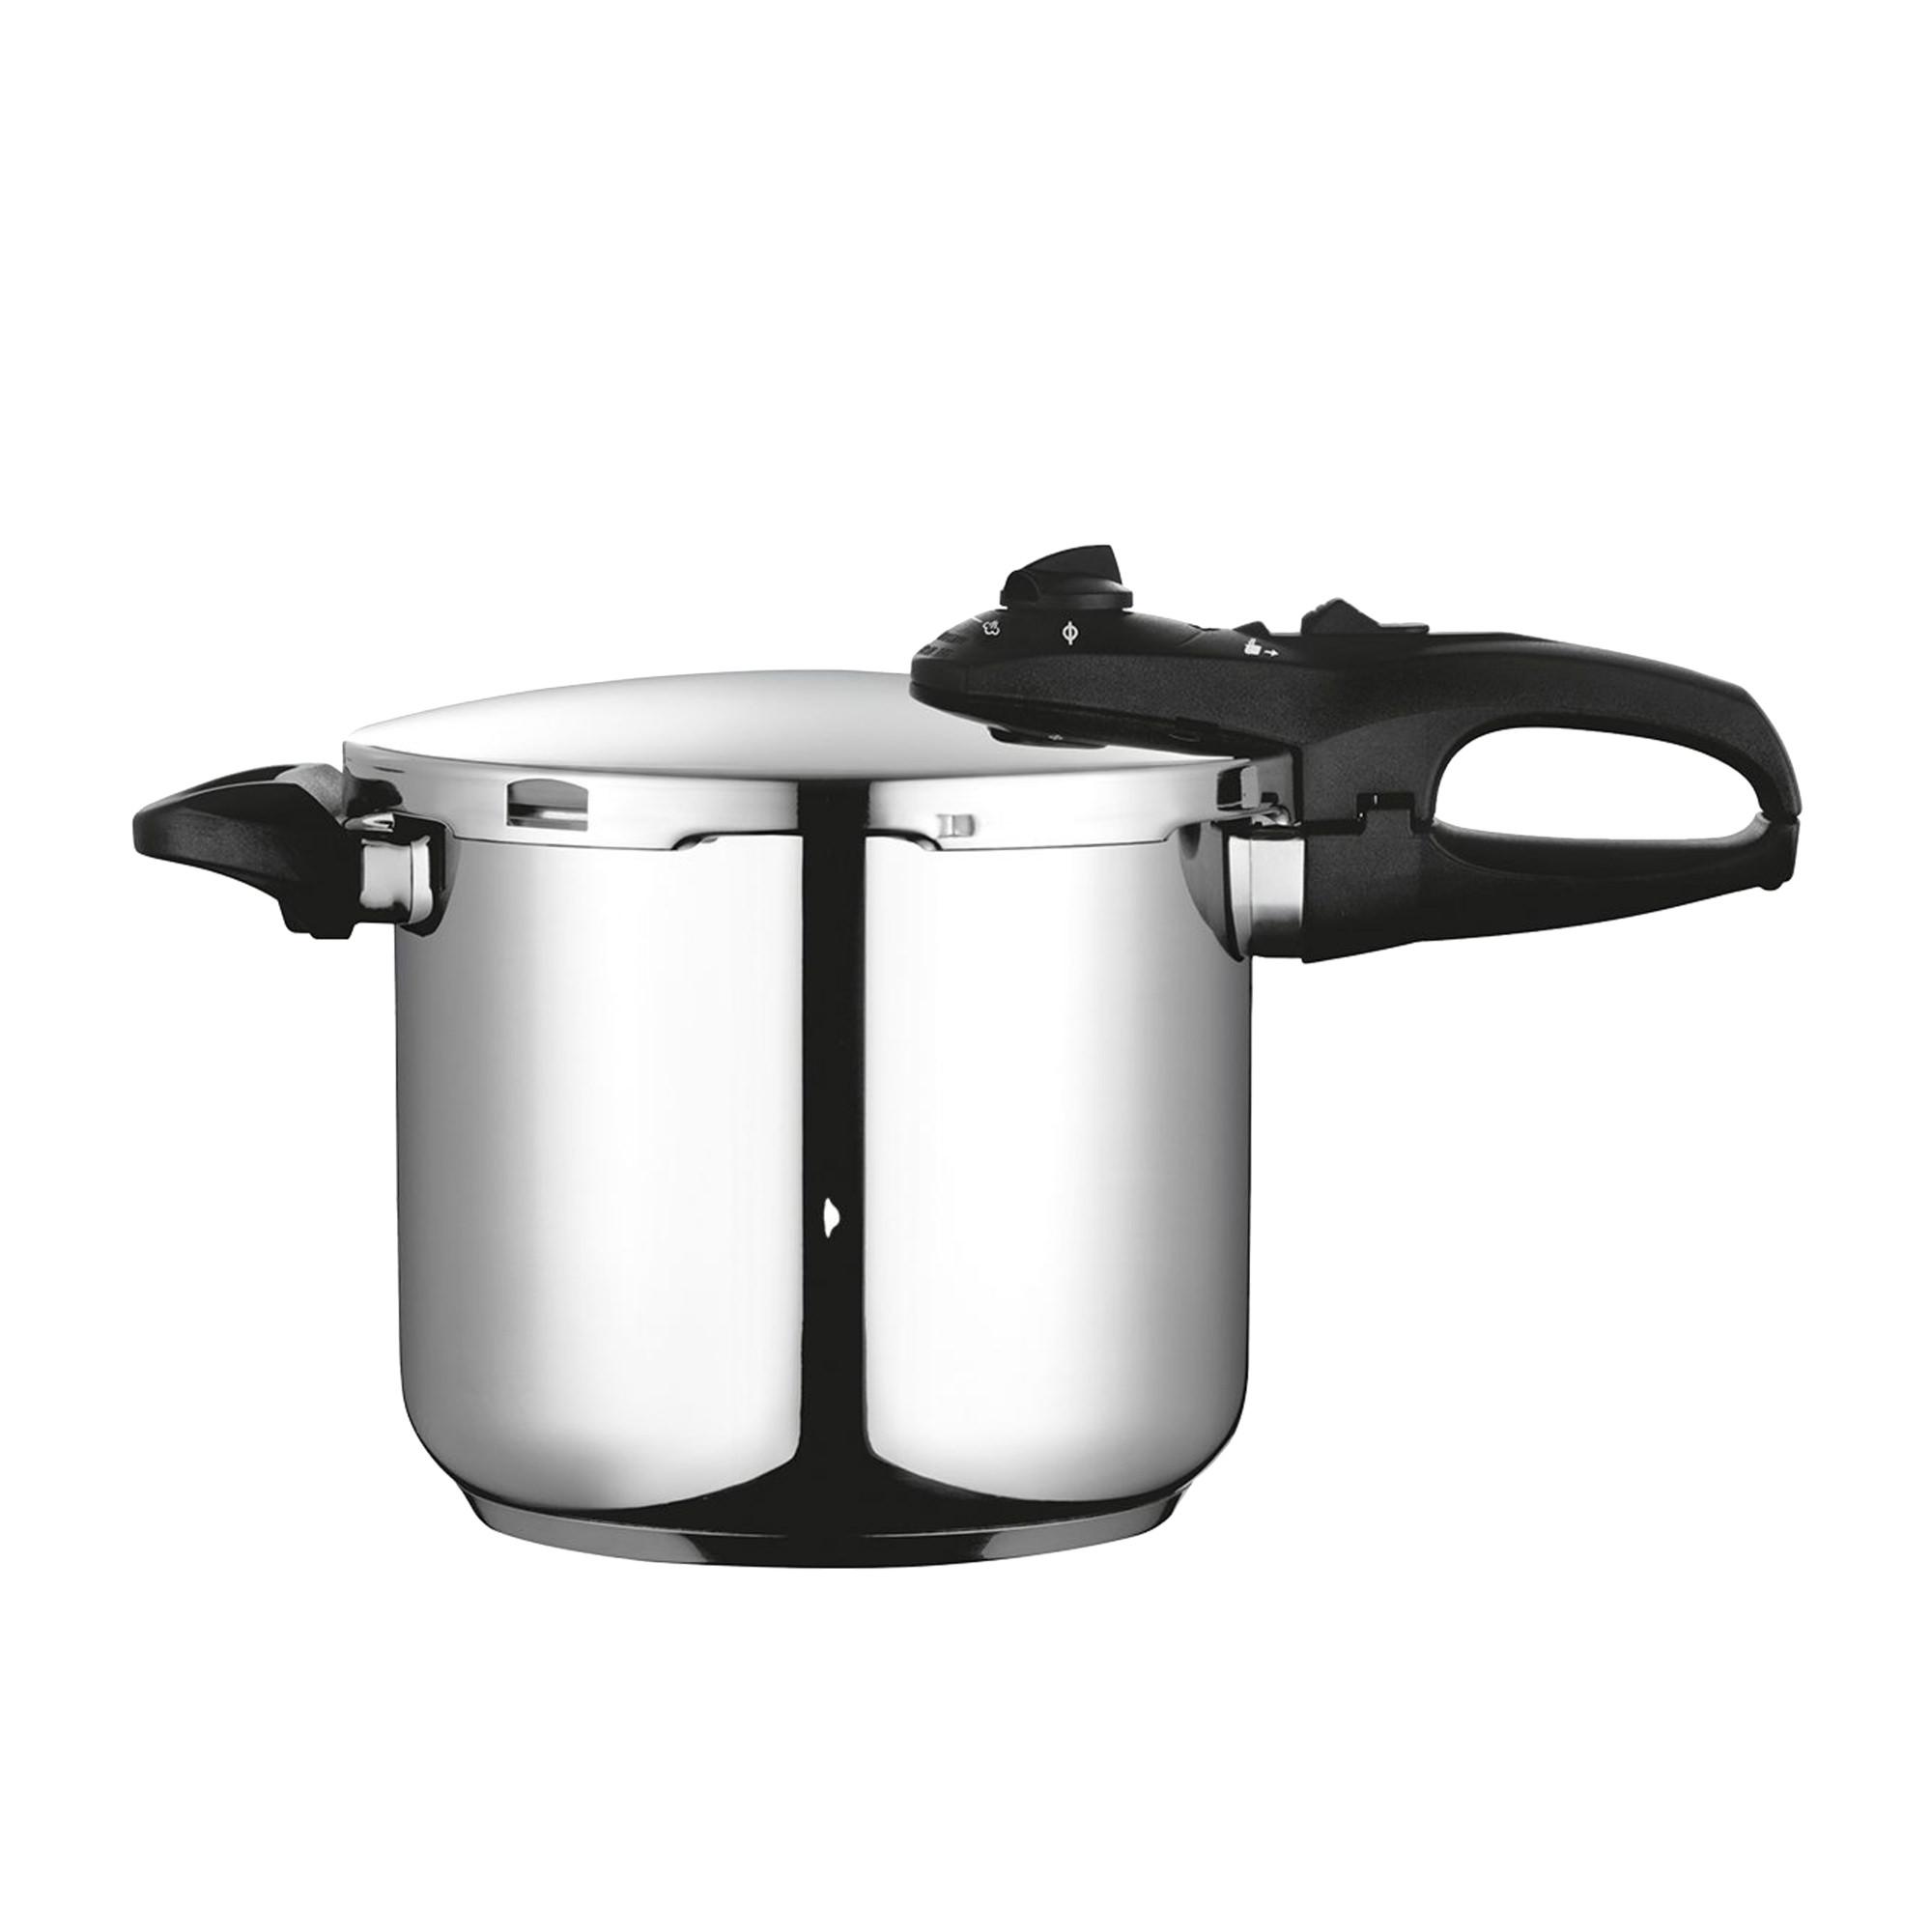 Fagor Duo Stainless Steel Pressure Cooker 7.5L Image 1